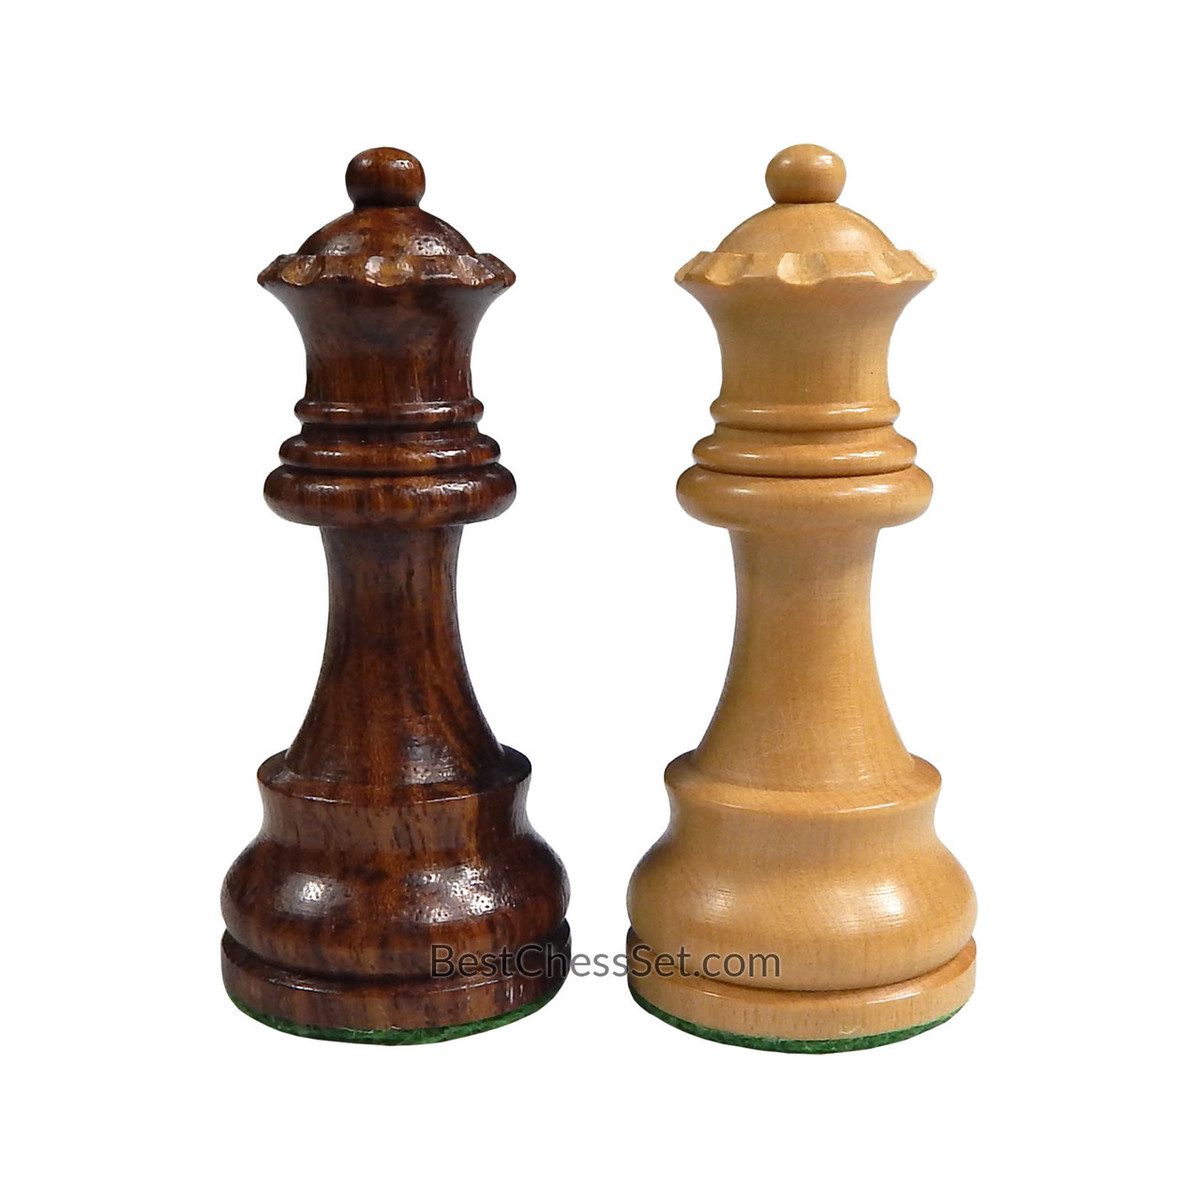 NO BOARD LARGE 3 Inch King EXTRA QUEENS Pimo Chess PIECES ONLY Weighted Set 